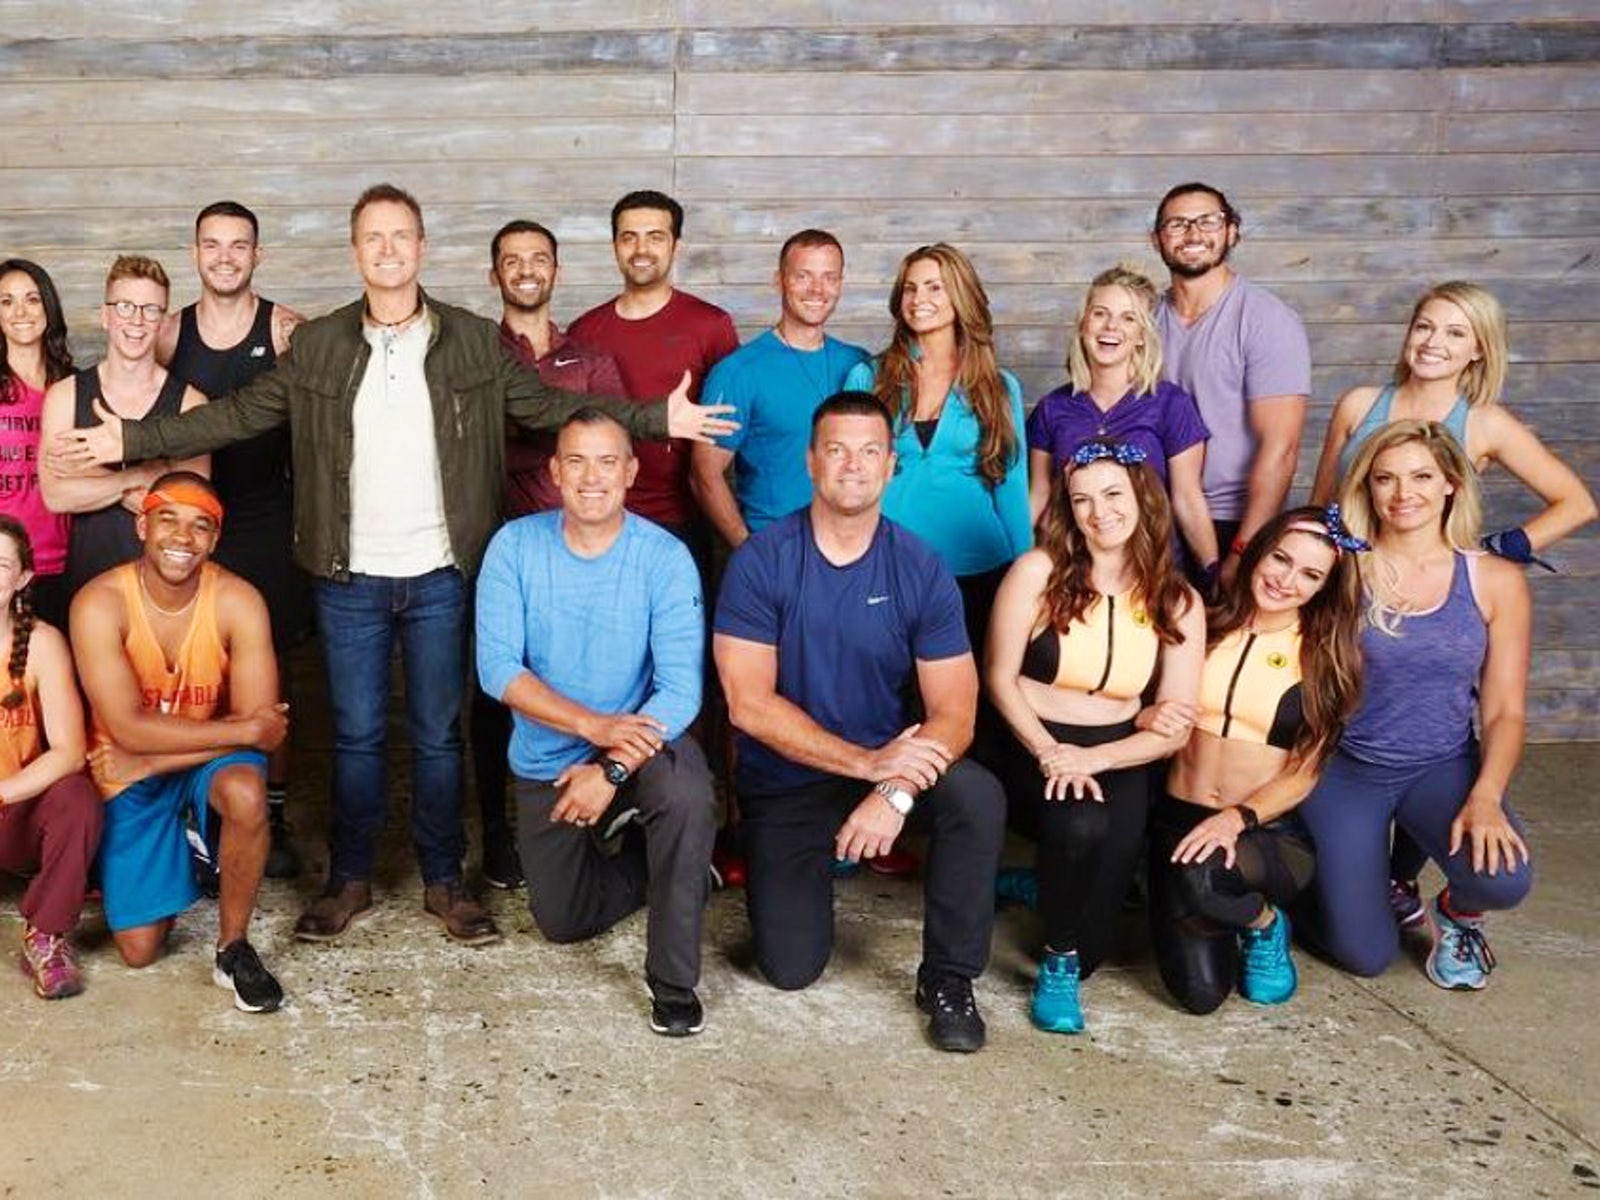 'The Amazing Race' Season 31 premiere bumped up to April 17, 11 realitystar teams officially